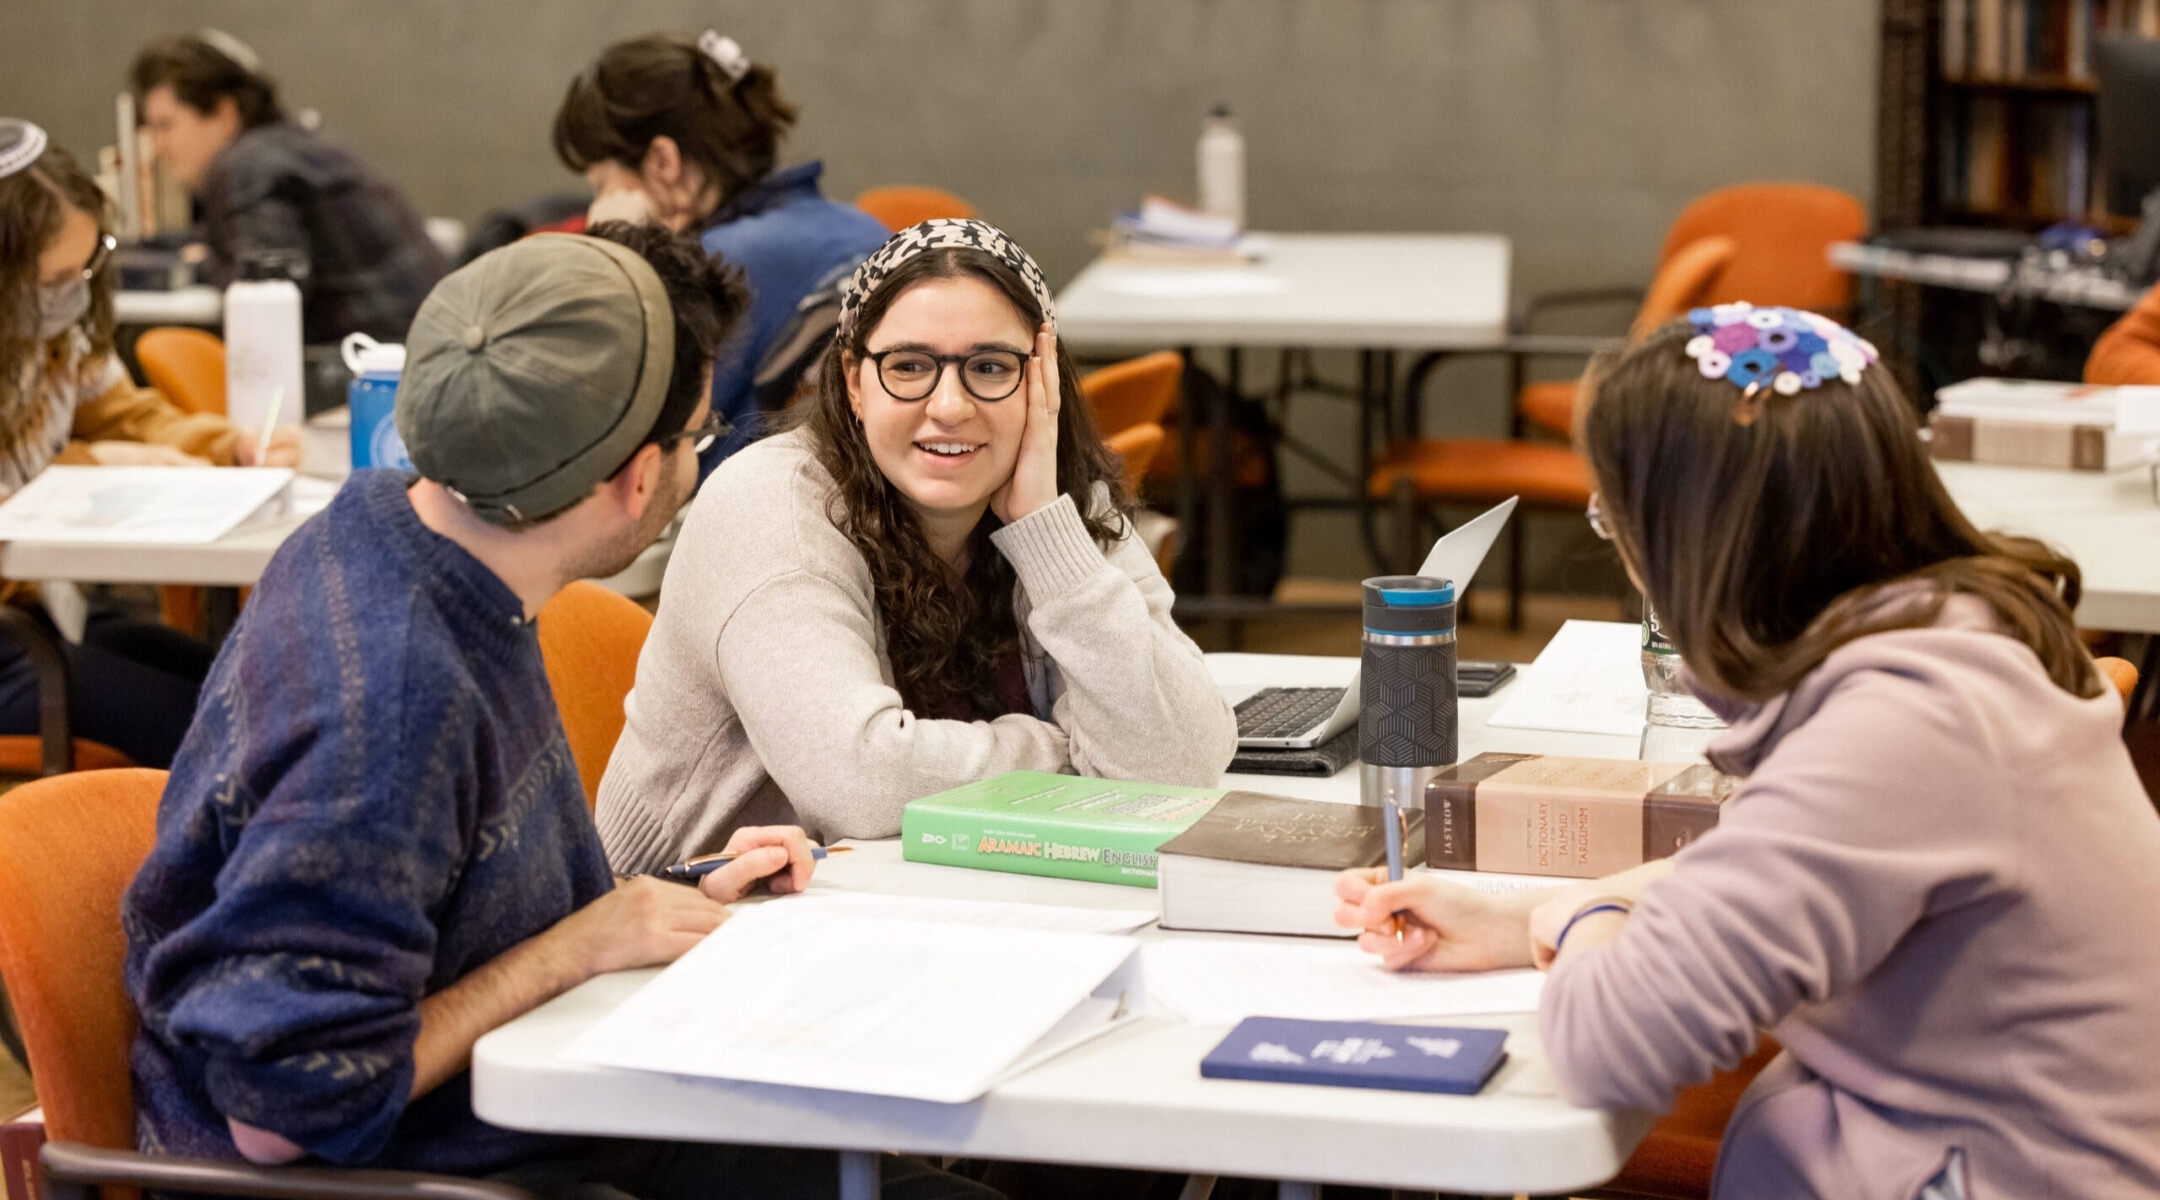 Yael Jaffe, a member of Hadar’s first cohort of rabbinic ordinees, learns in the New York beit midrash, or study hall, of the Jewish learning and programming center. (Courtesy Hadar)